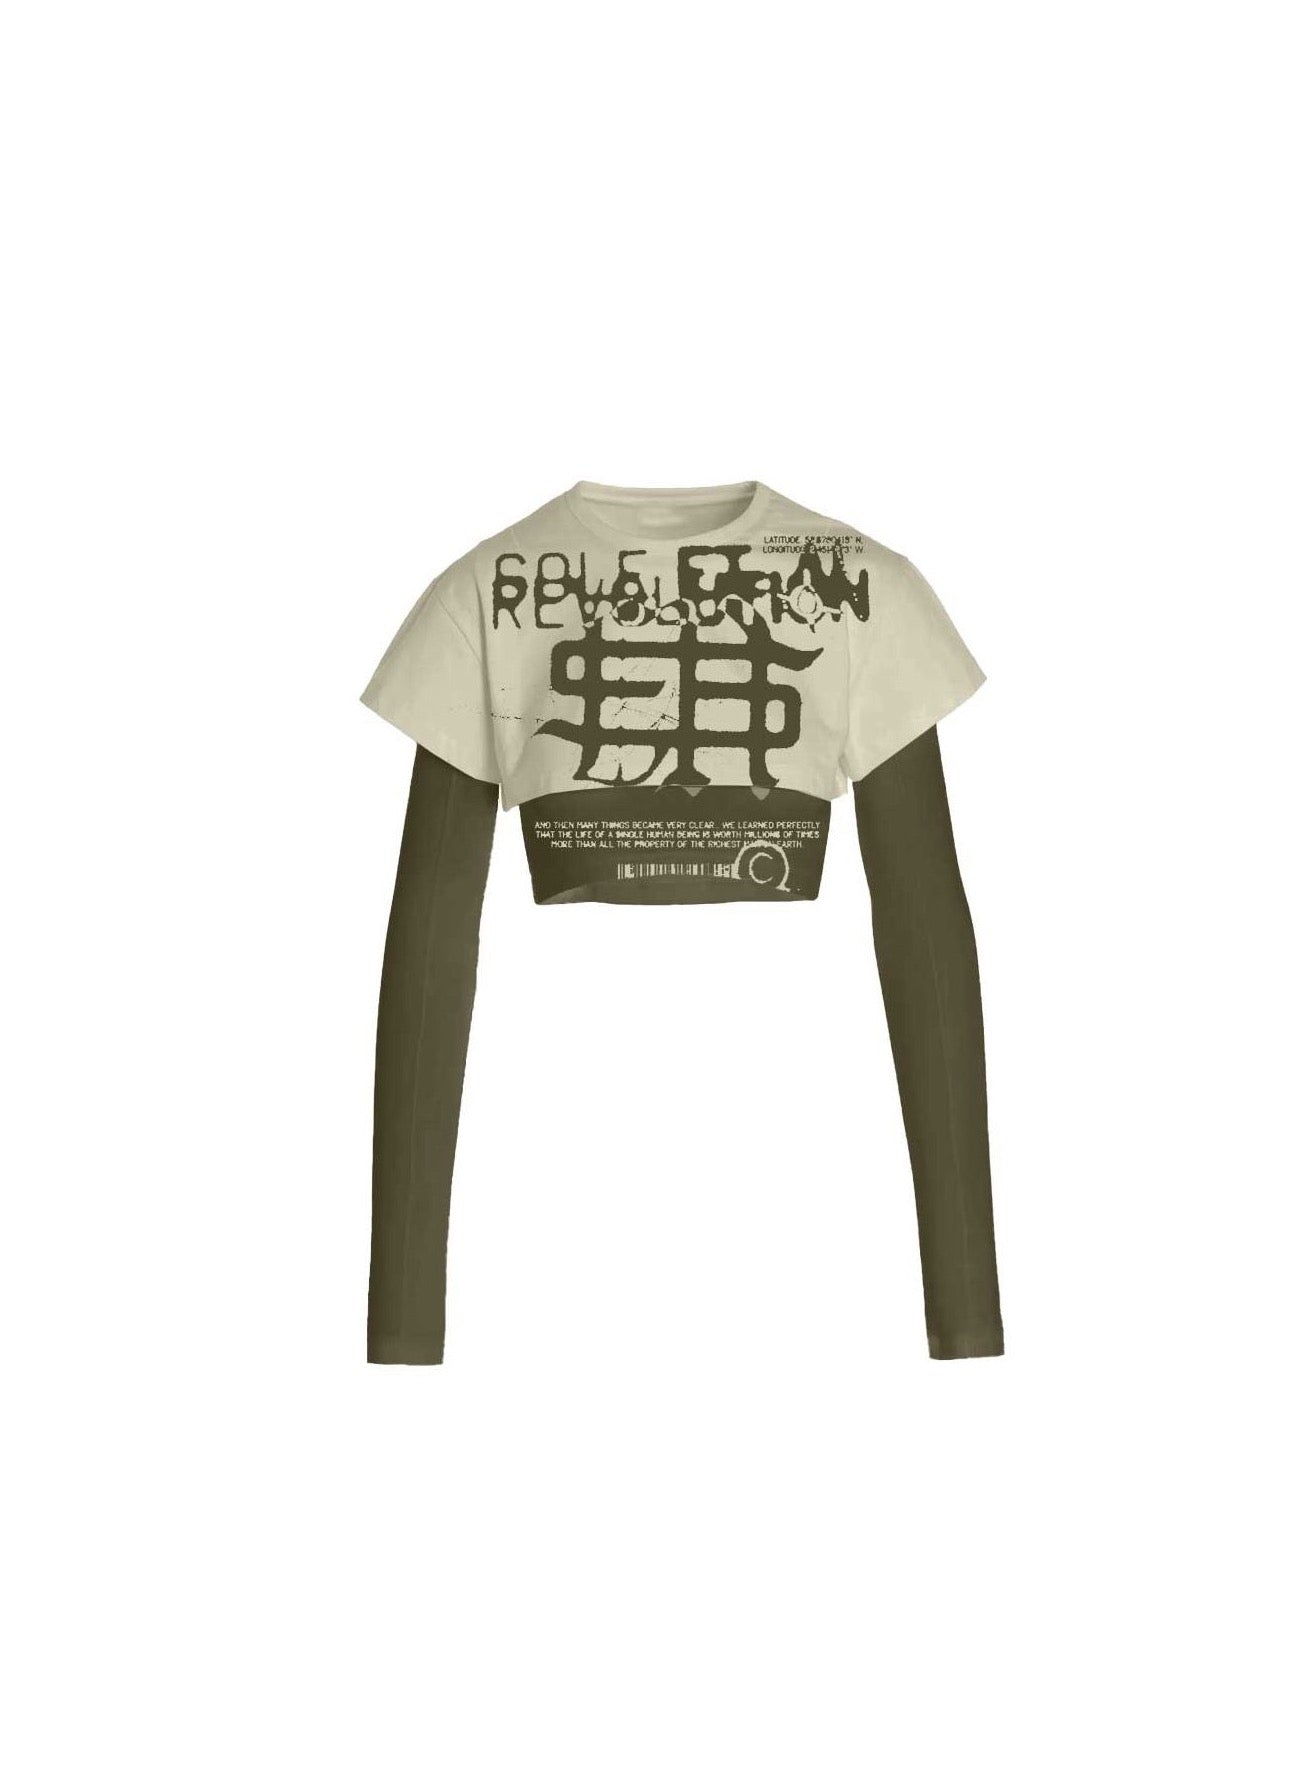 Sohle et. Al Women's Revølutiøn Double Layered Cropped Tee : Sand / Military Green